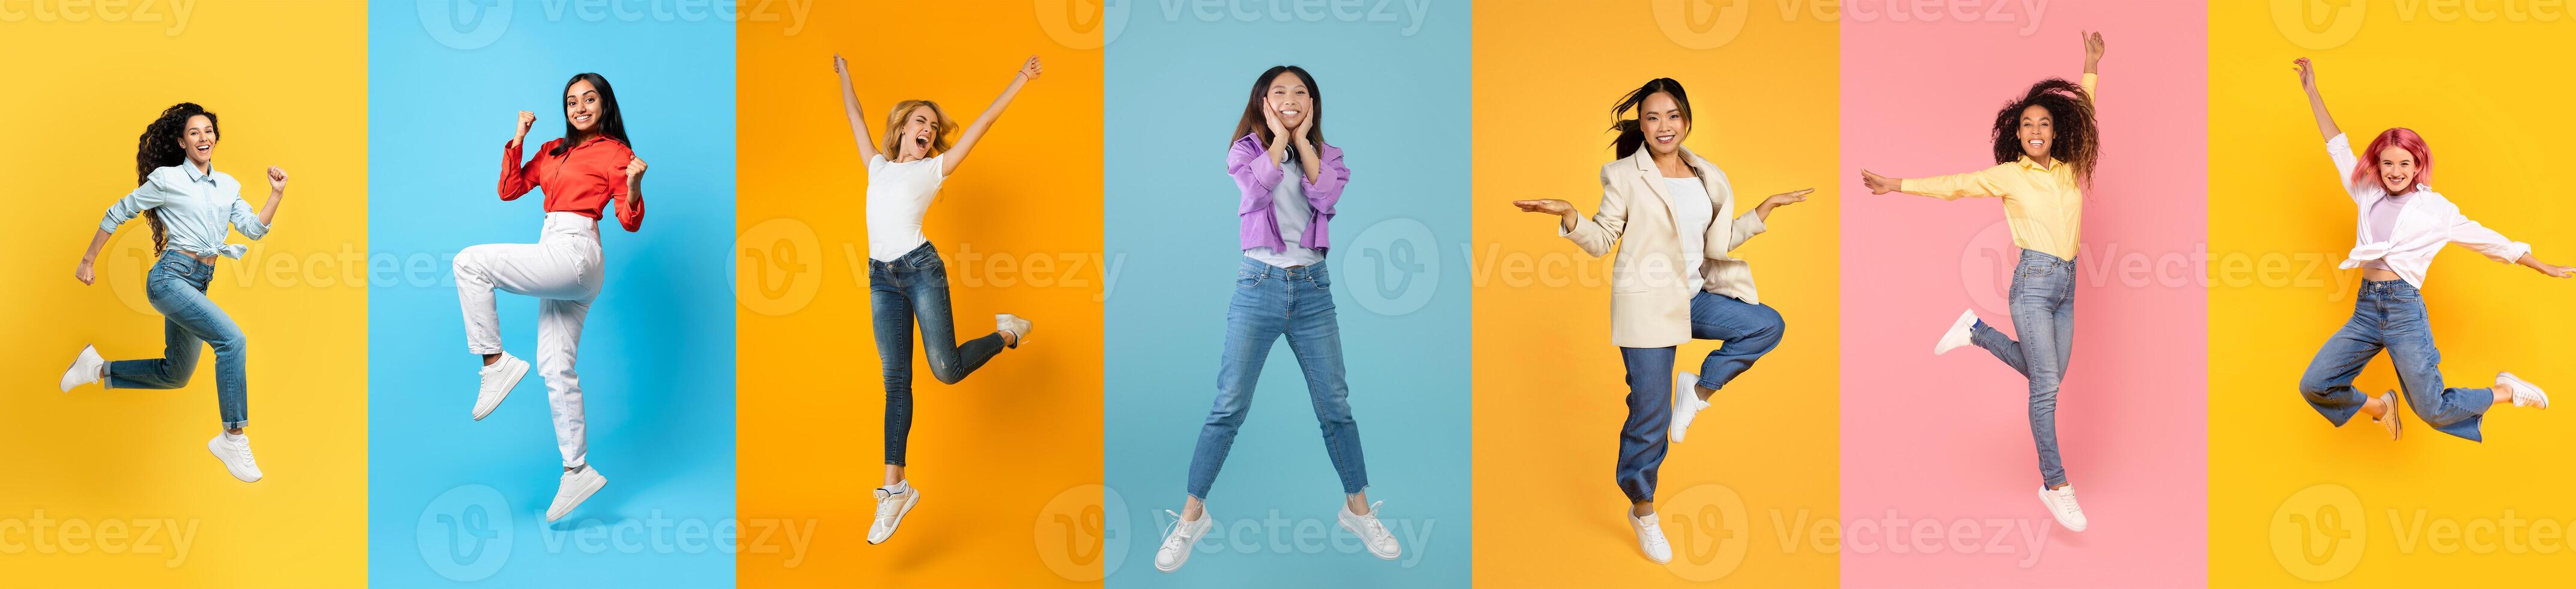 Diverse Overjoyed Women Jumping In Air Against Colorful Studio Backgrounds photo